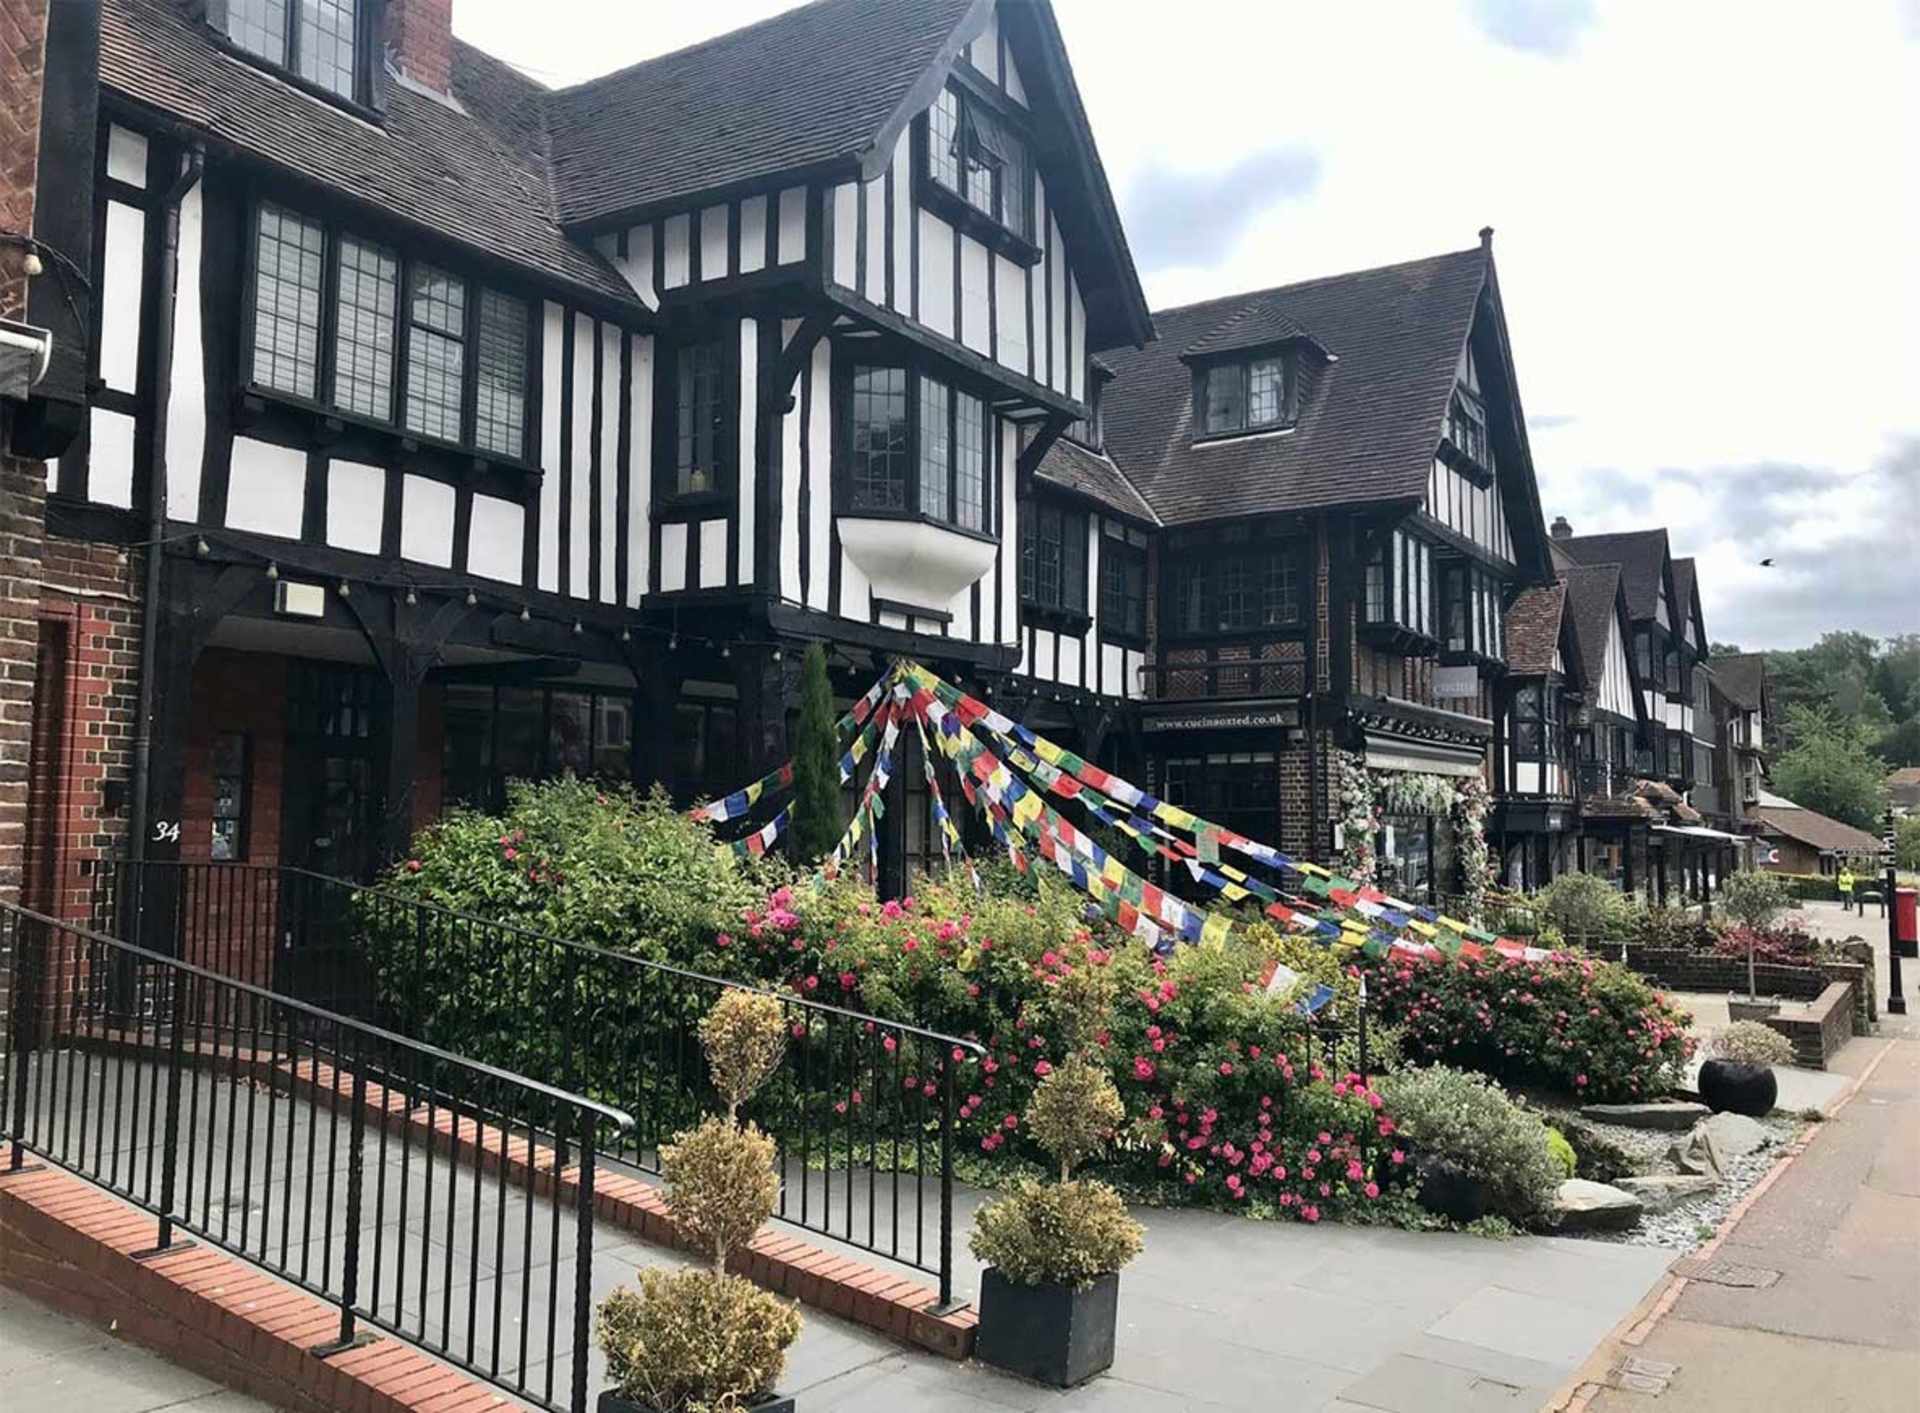 Berkeley Inspiration, Oxted, House with bunting